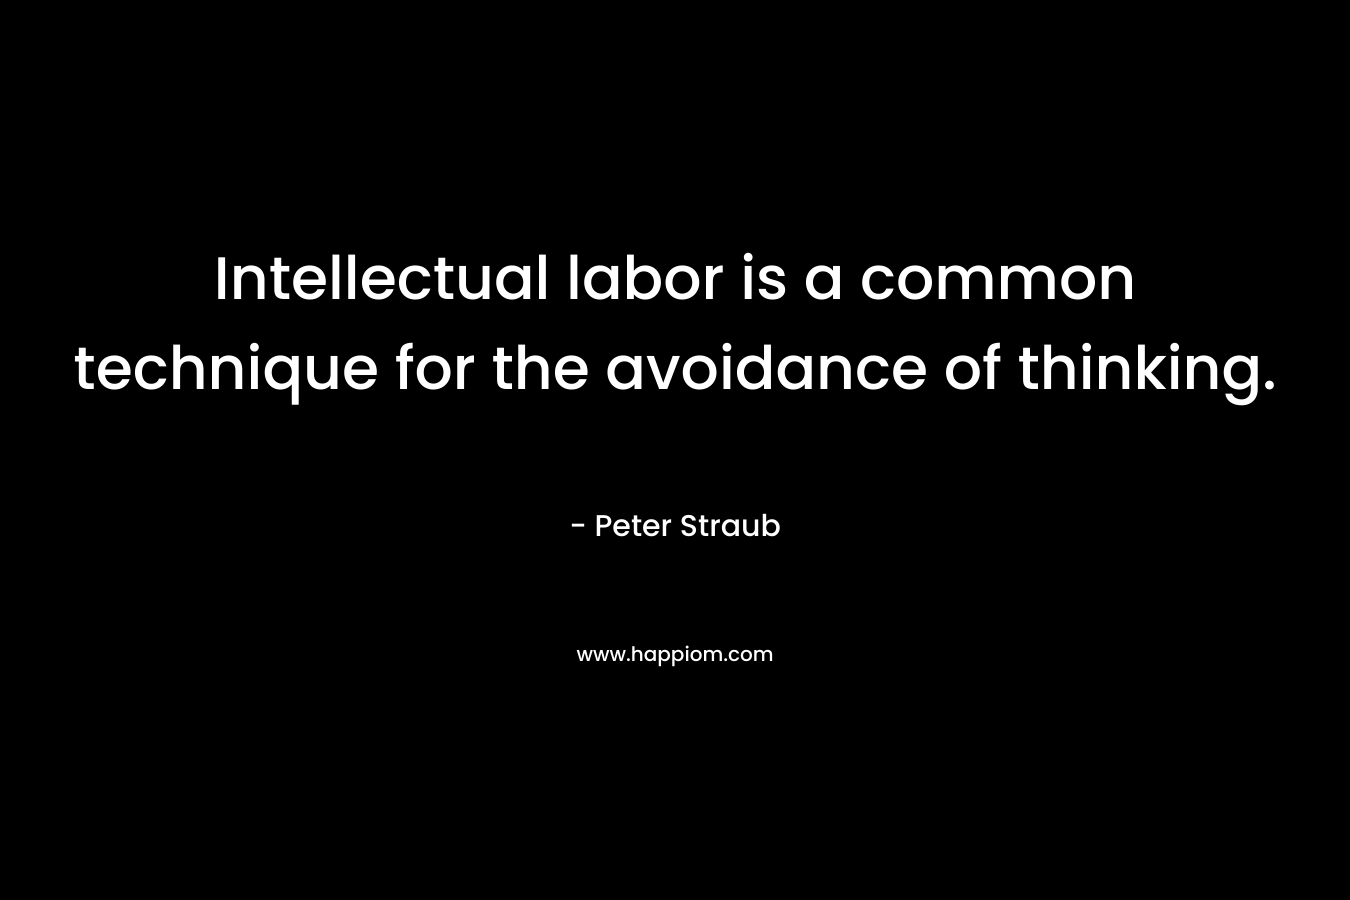 Intellectual labor is a common technique for the avoidance of thinking.